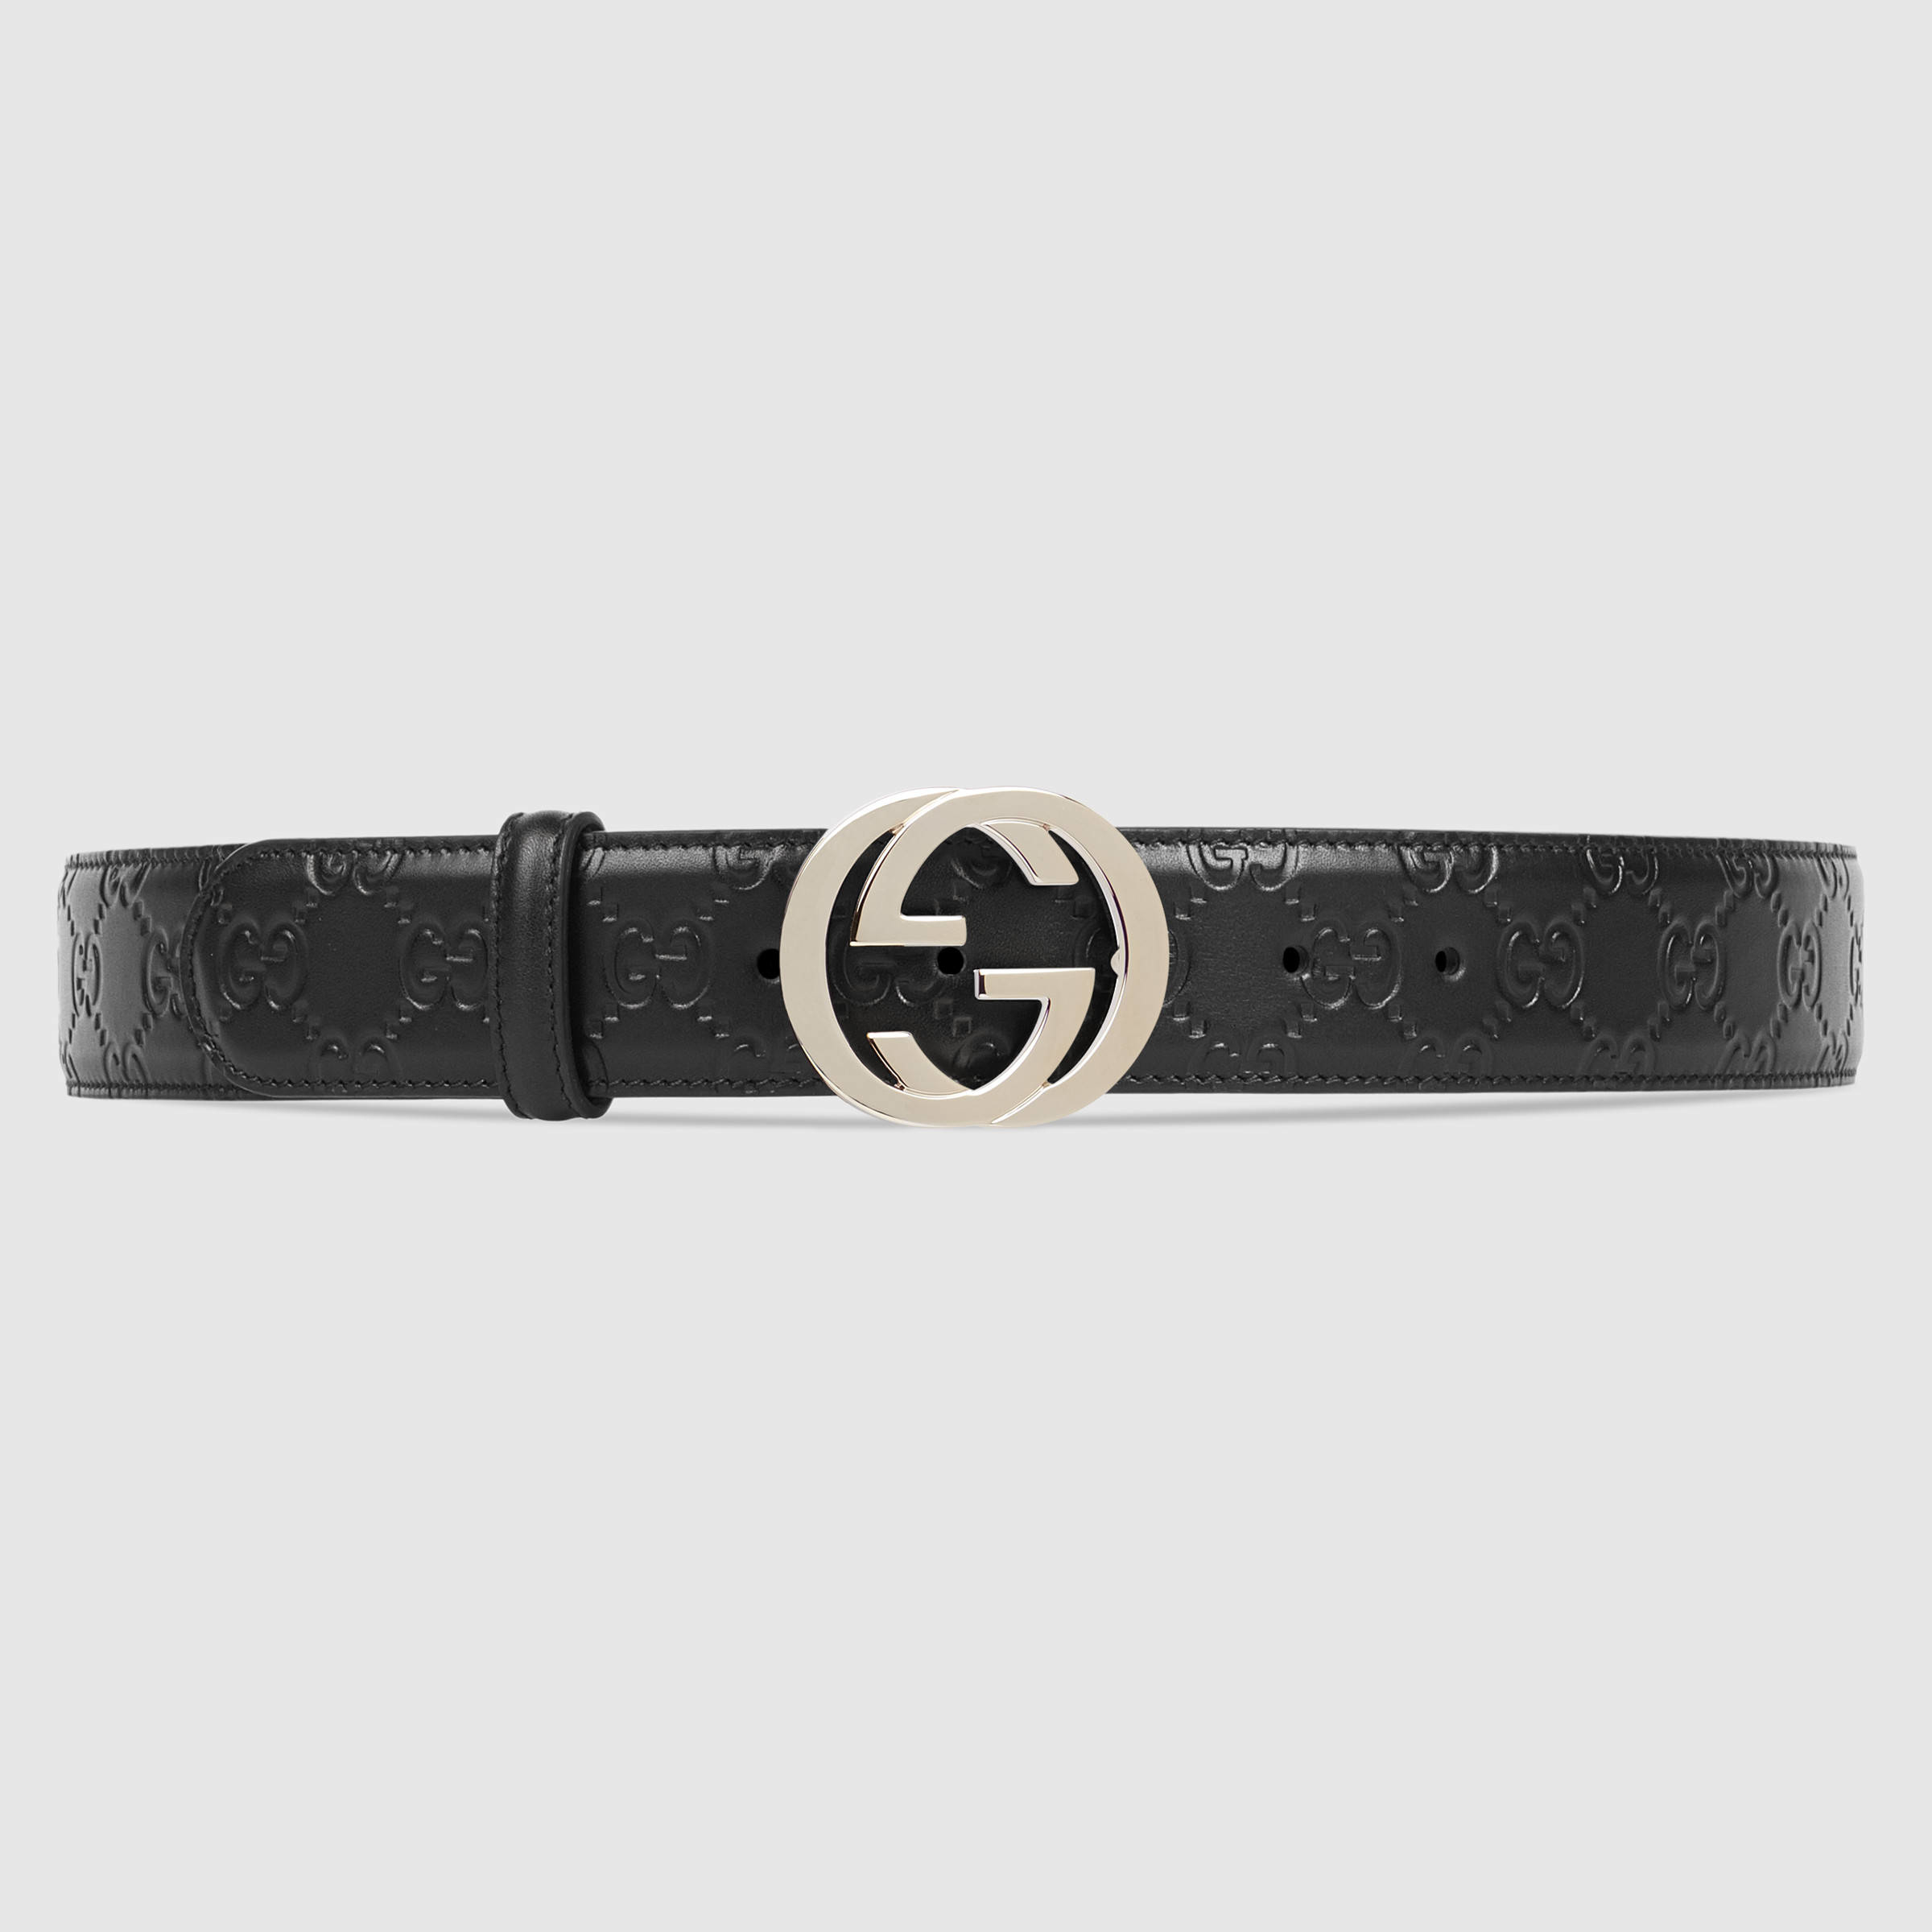 Lyst - Gucci Signature Leather Belt in Black for Men